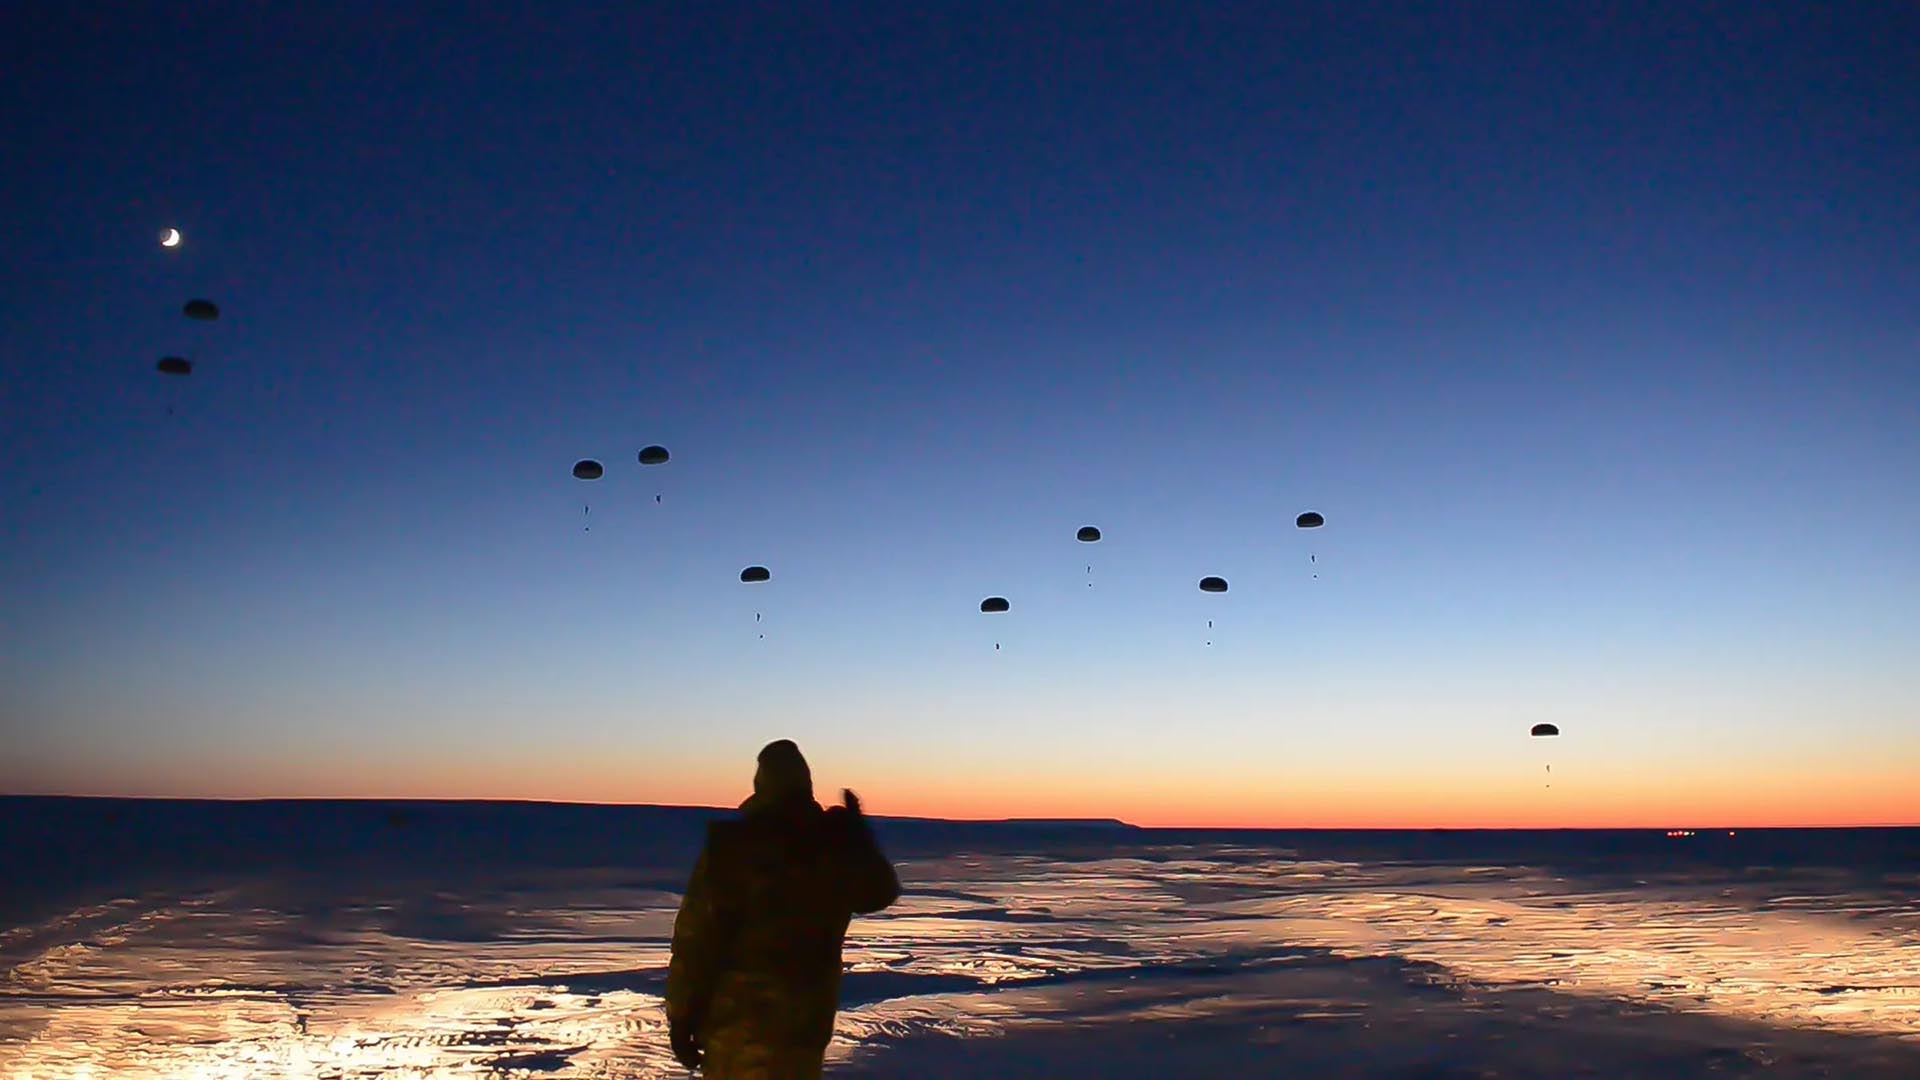 A figure watches as soldiers parachute down to the ground as part of military exercise